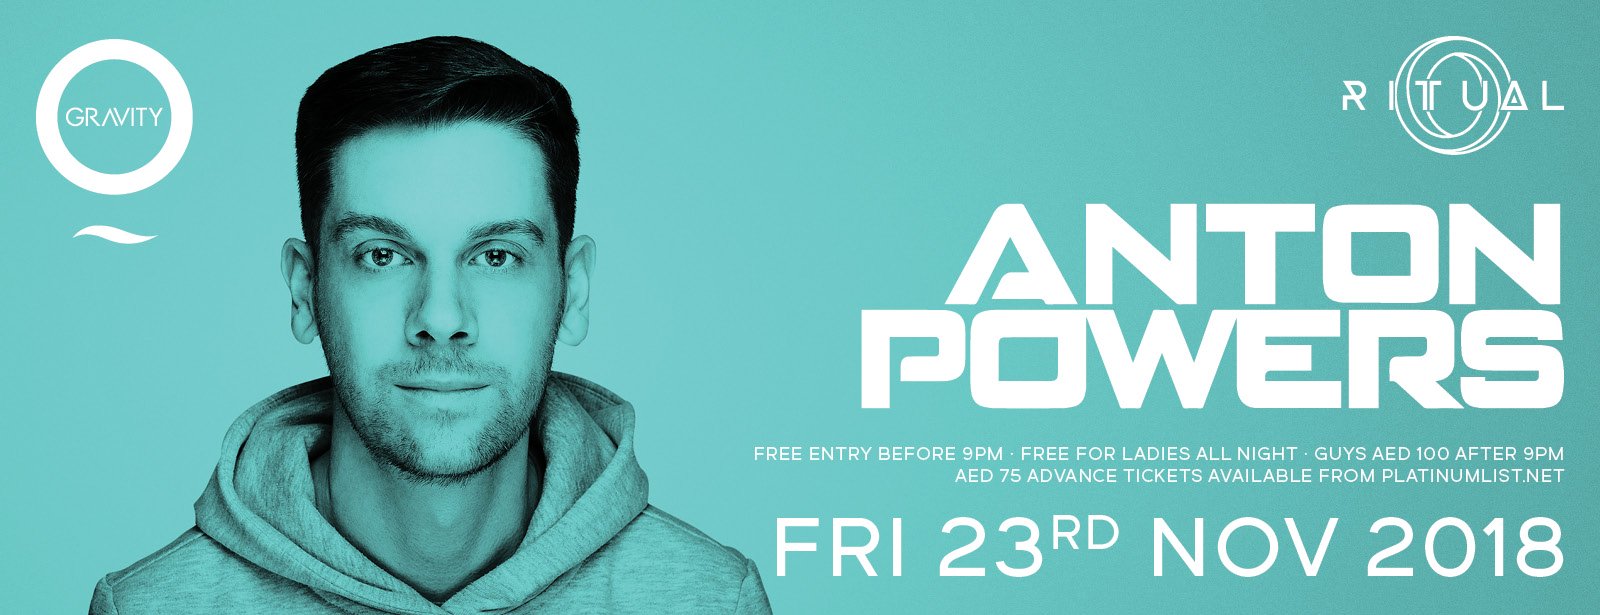 Ritual with Anton Powers - Coming Soon in UAE